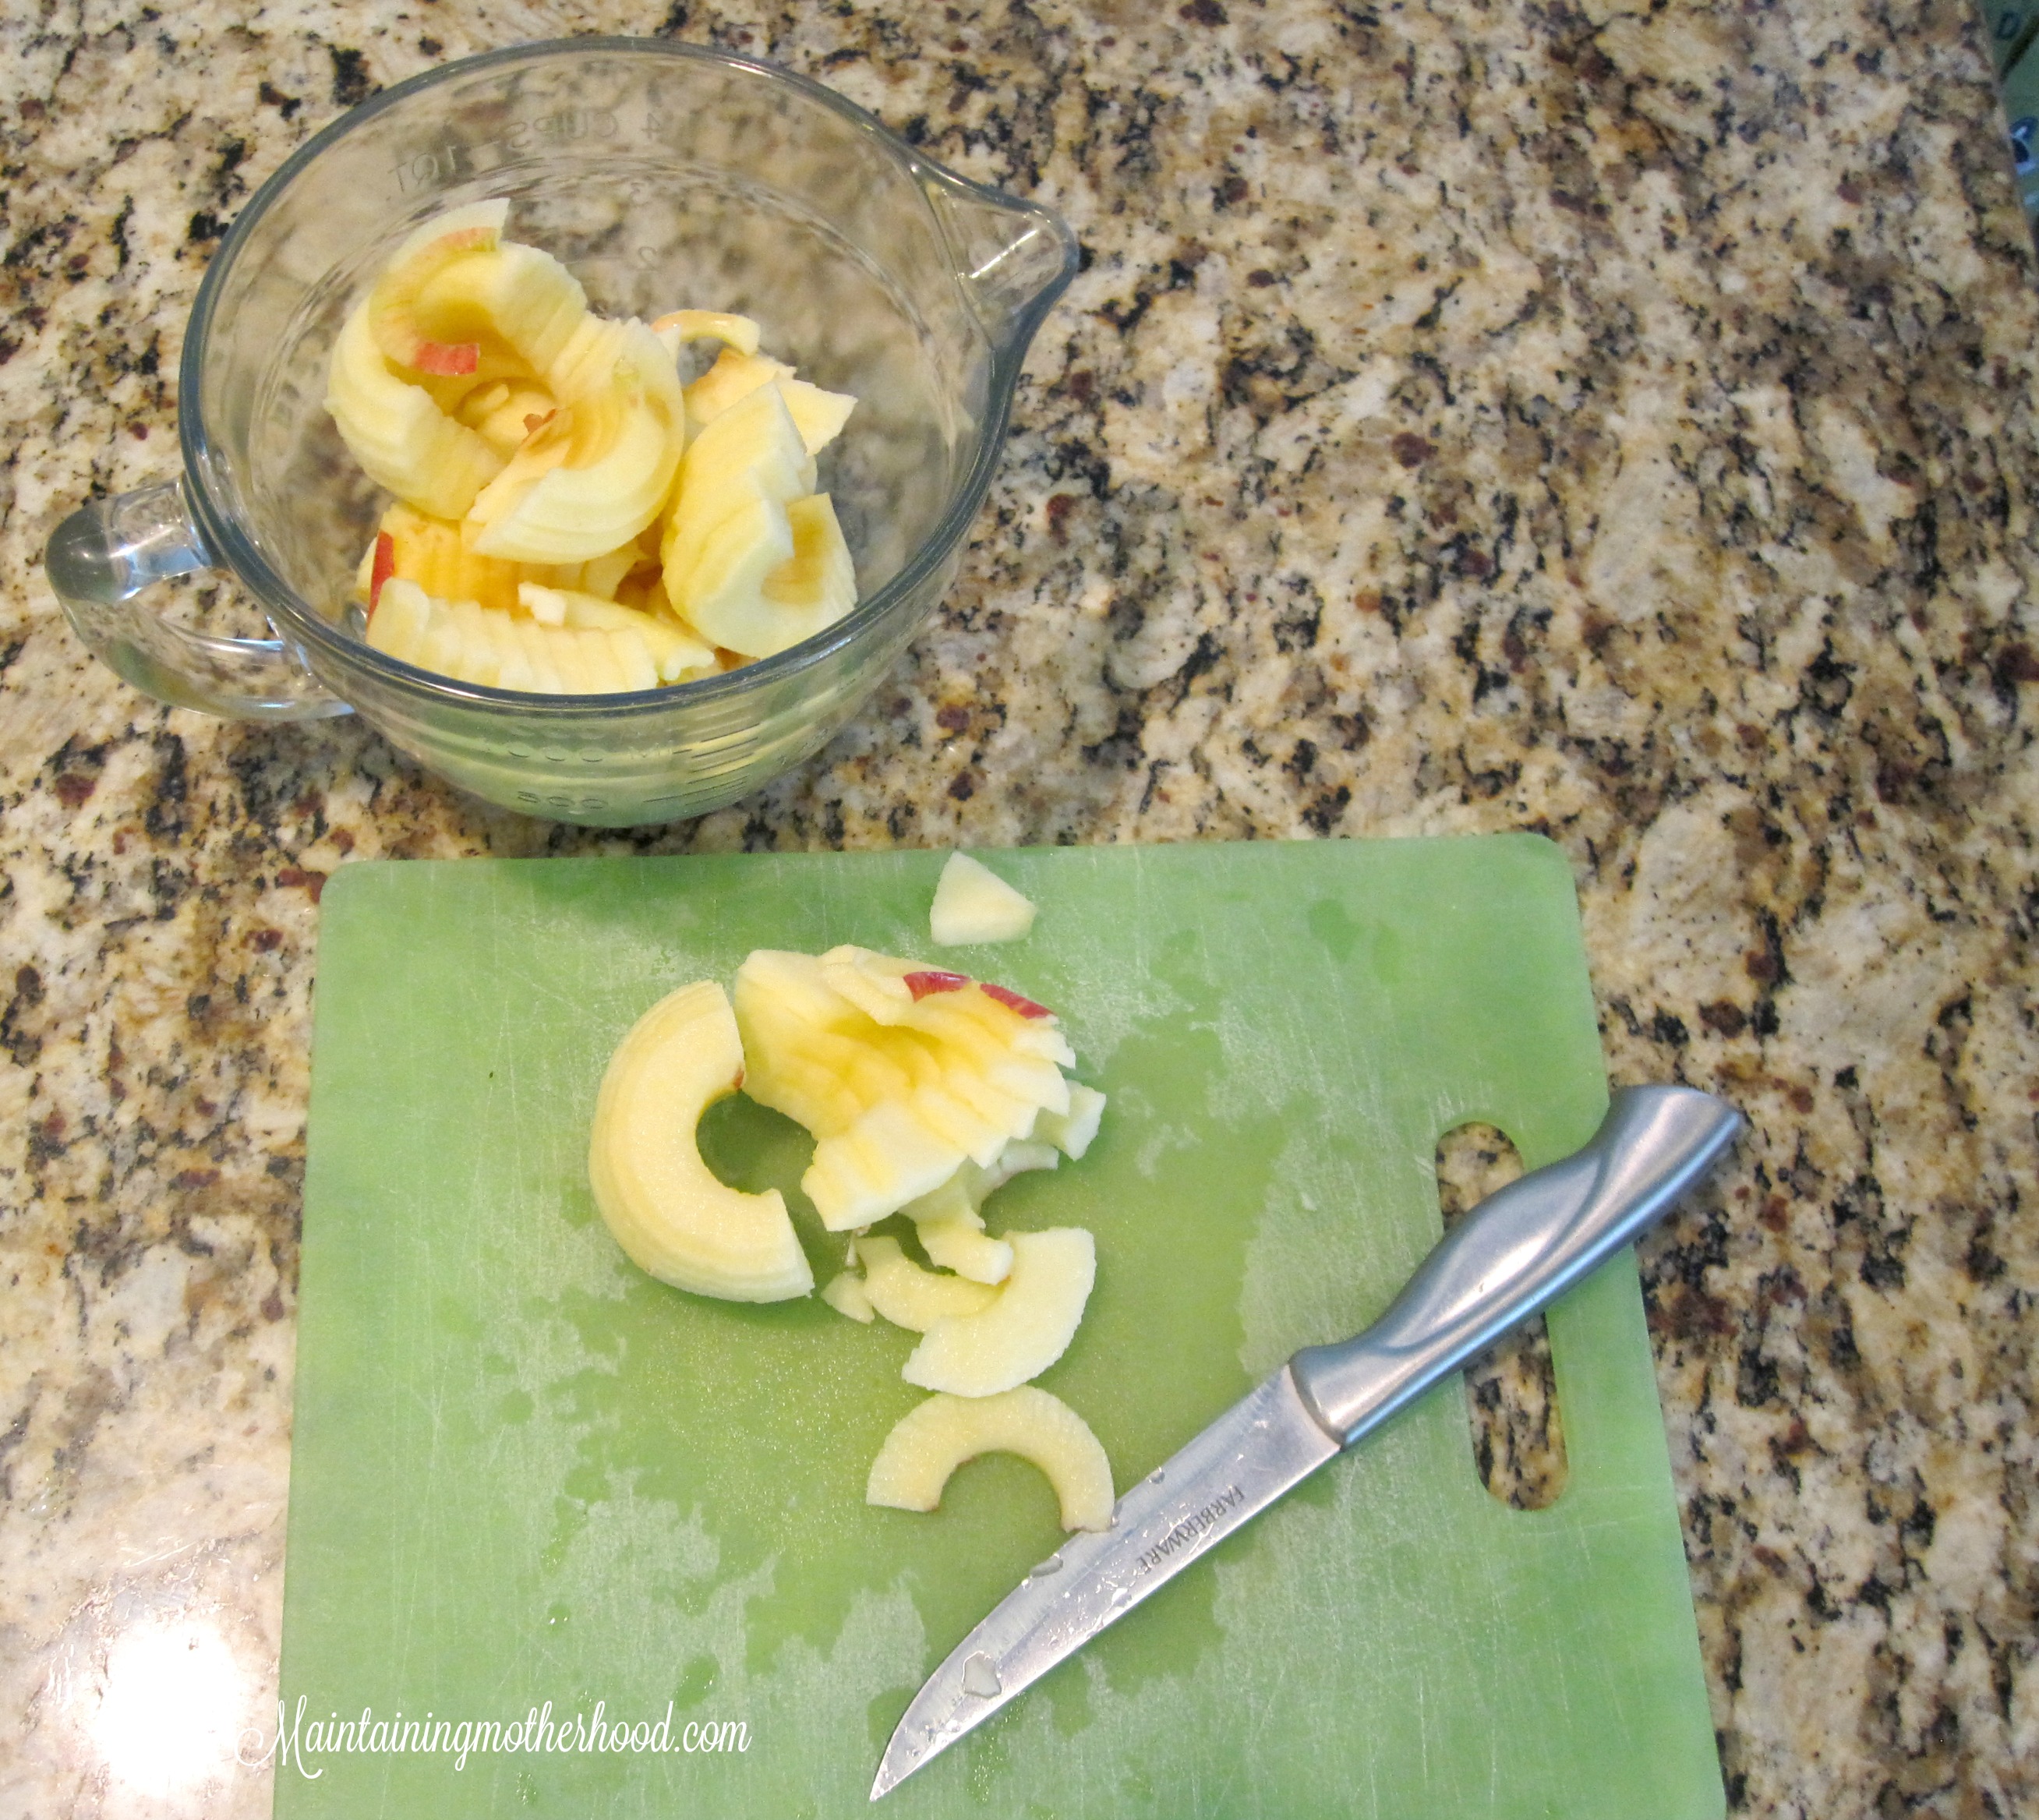 I used to think the only way to make applesauce was with a food strainer. I recently tried making applesauce in a blender, and really liked it!